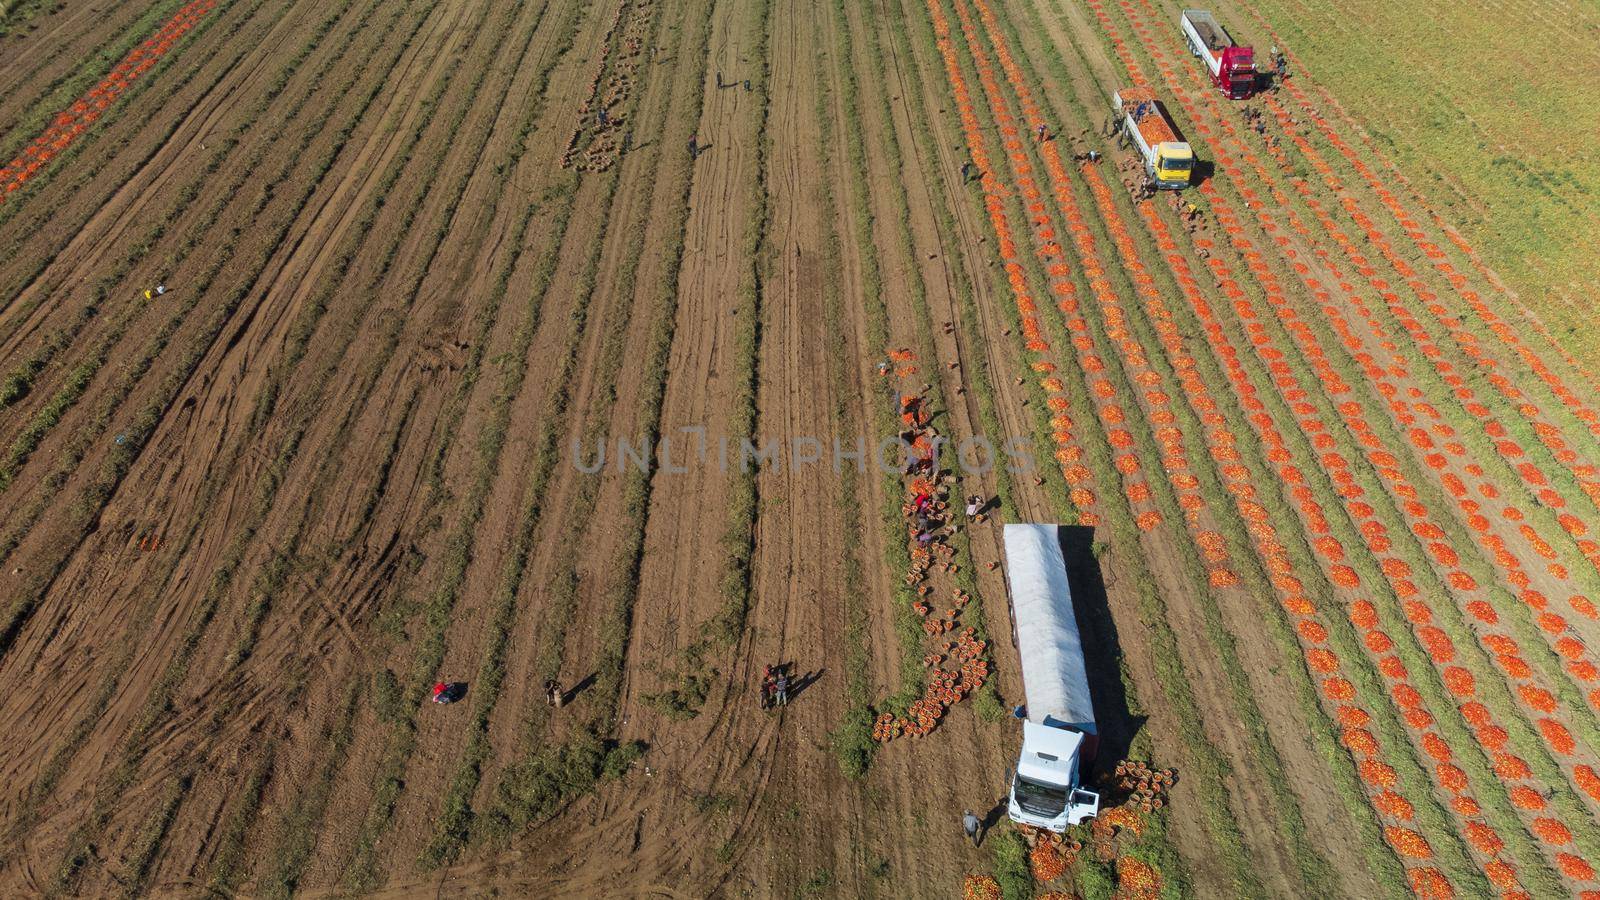 Aerial image of trucks loaded with Fresh harvested ripe Red Tomatoes. by senkaya